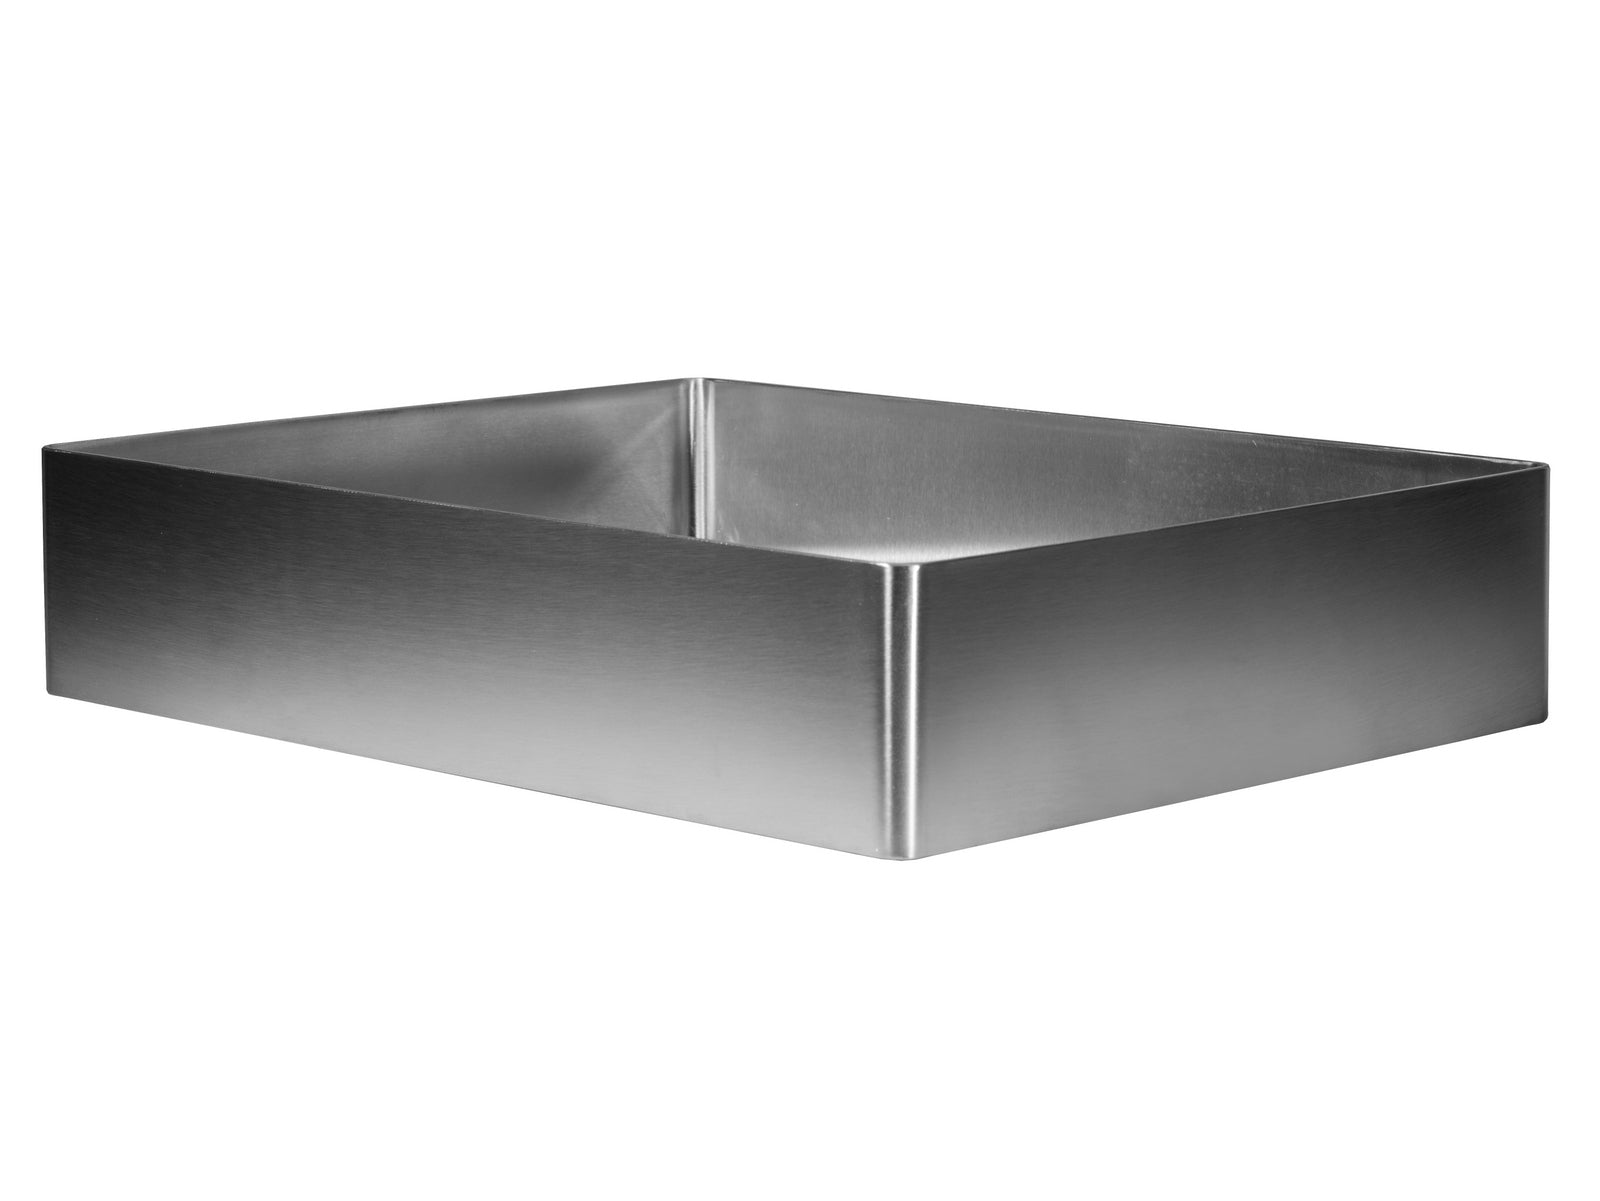 Rectangular 19" x 14 1/2" Stainless Steel Bathroom Vessel Sink with Drain in Silver